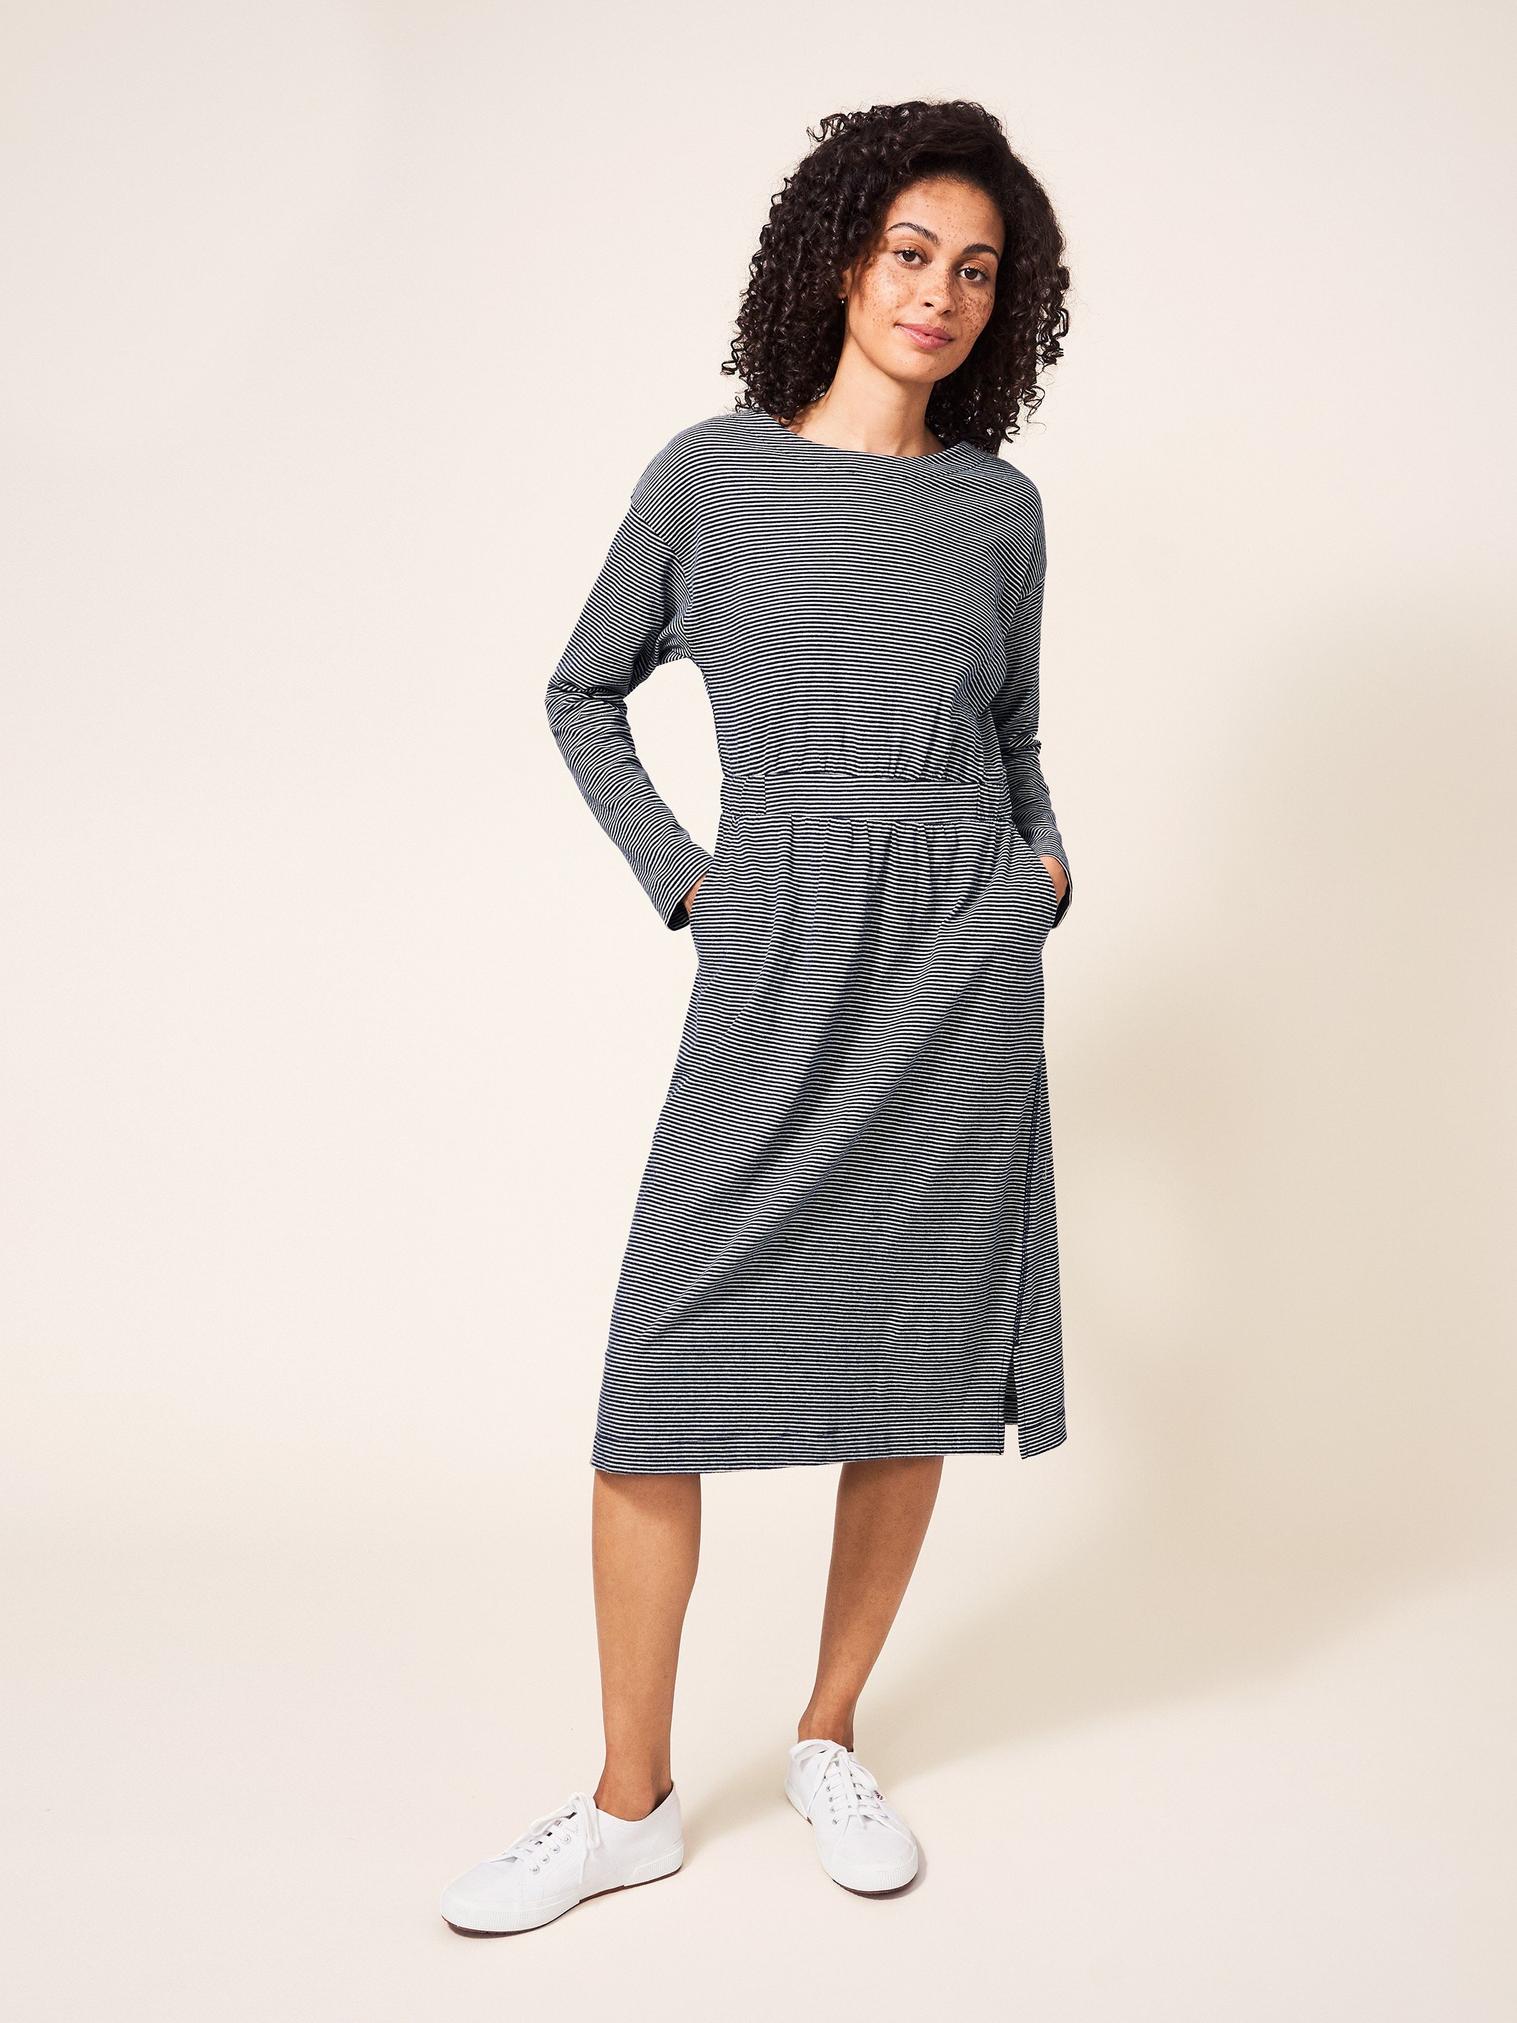 Evie Striped Jersey Dress in NAVY MULTI - LIFESTYLE